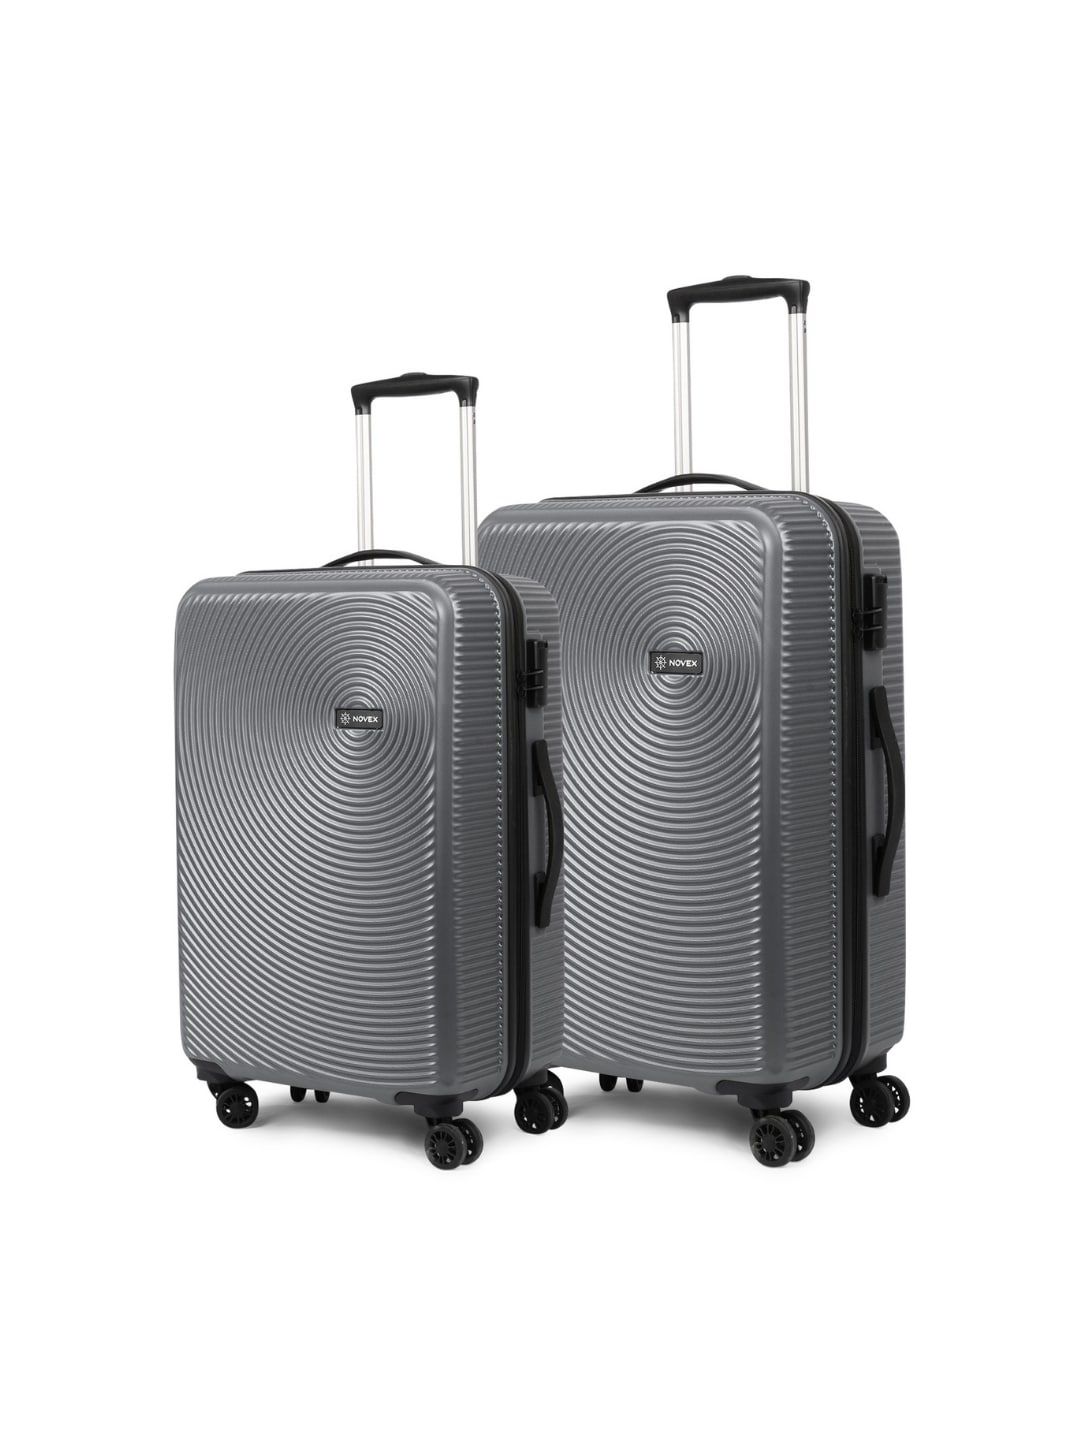 NOVEX Unisex Set Of 2 Grey Textured Hard-Sided Trolley Suitcases Price in India